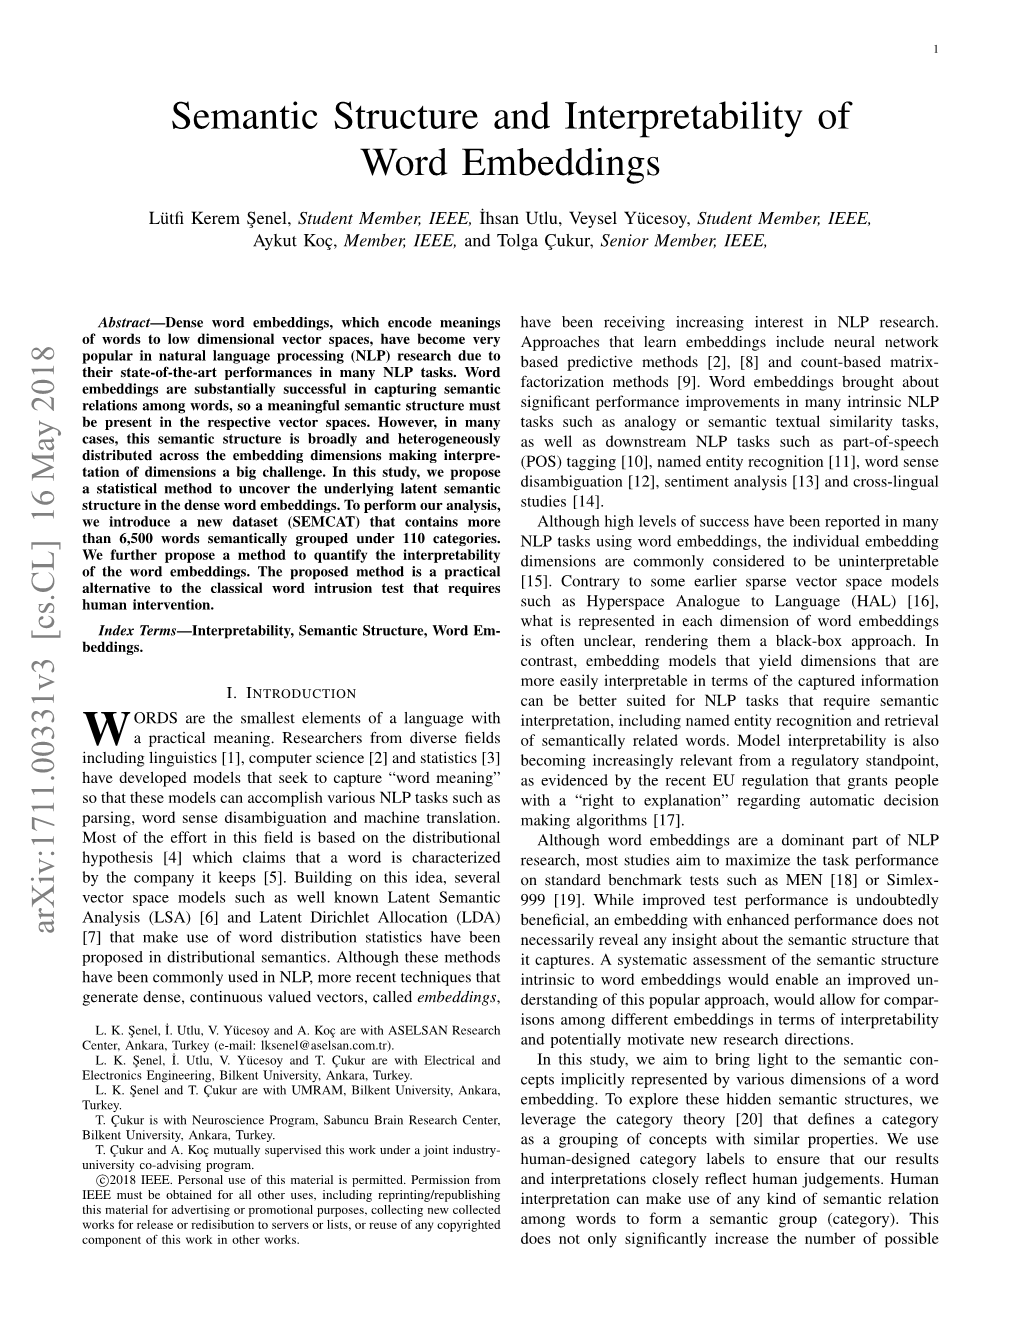 Semantic Structure and Interpretability of Word Embeddings